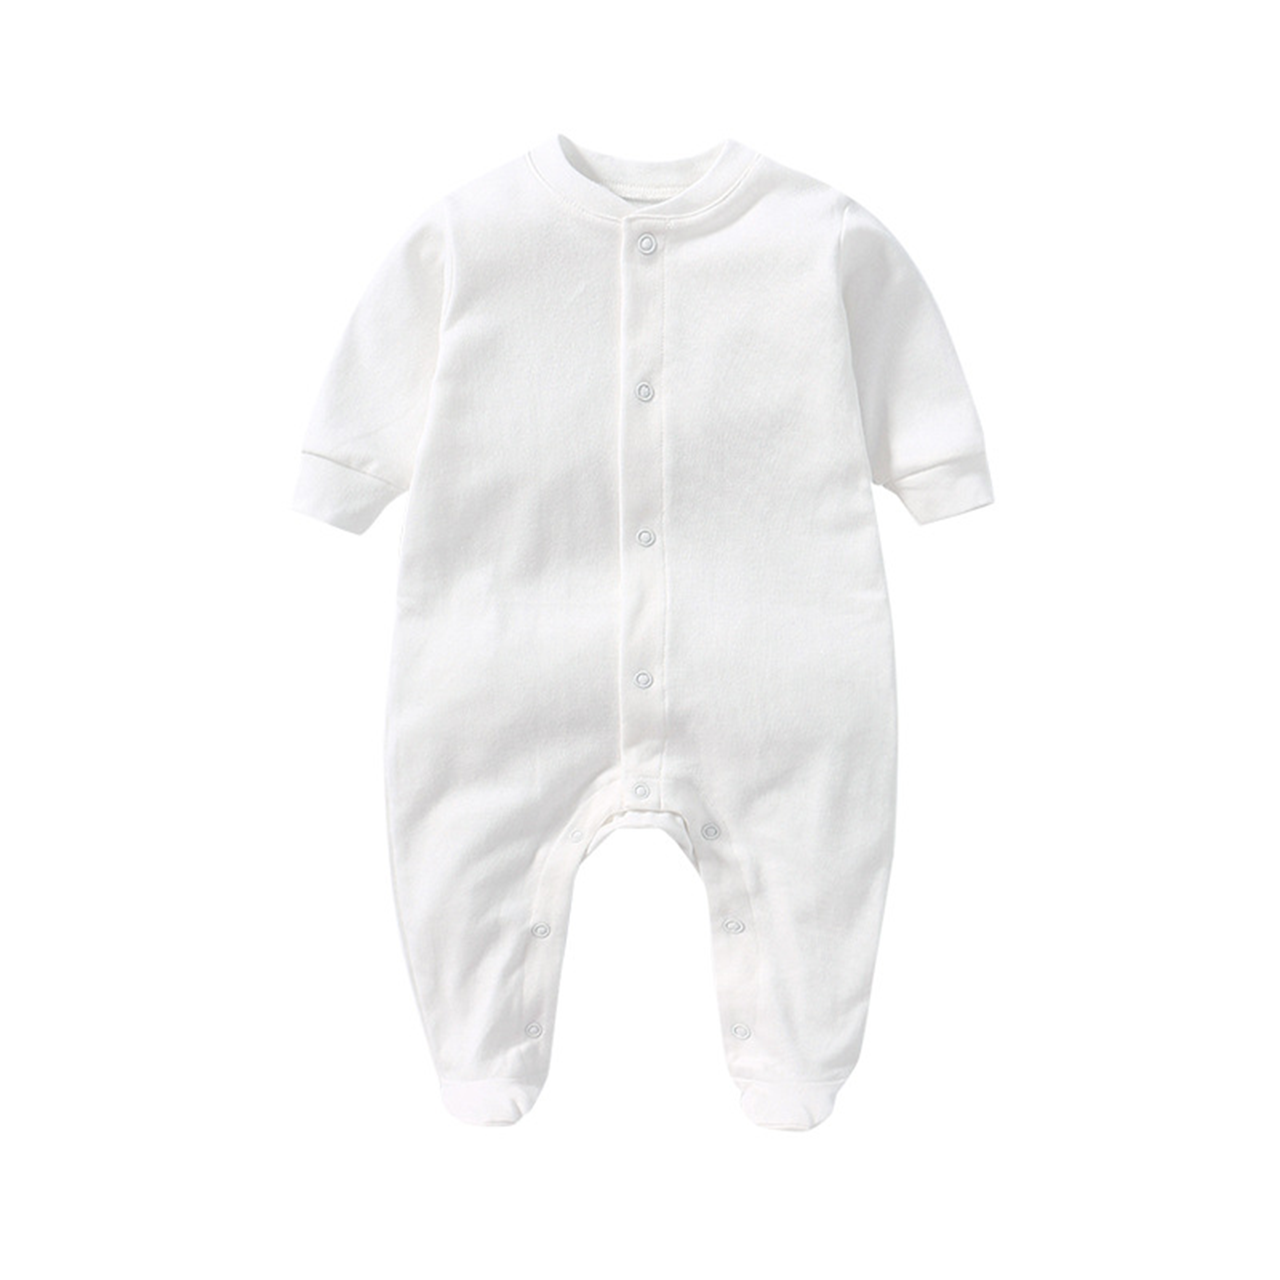 7 Colors Baby Rompers